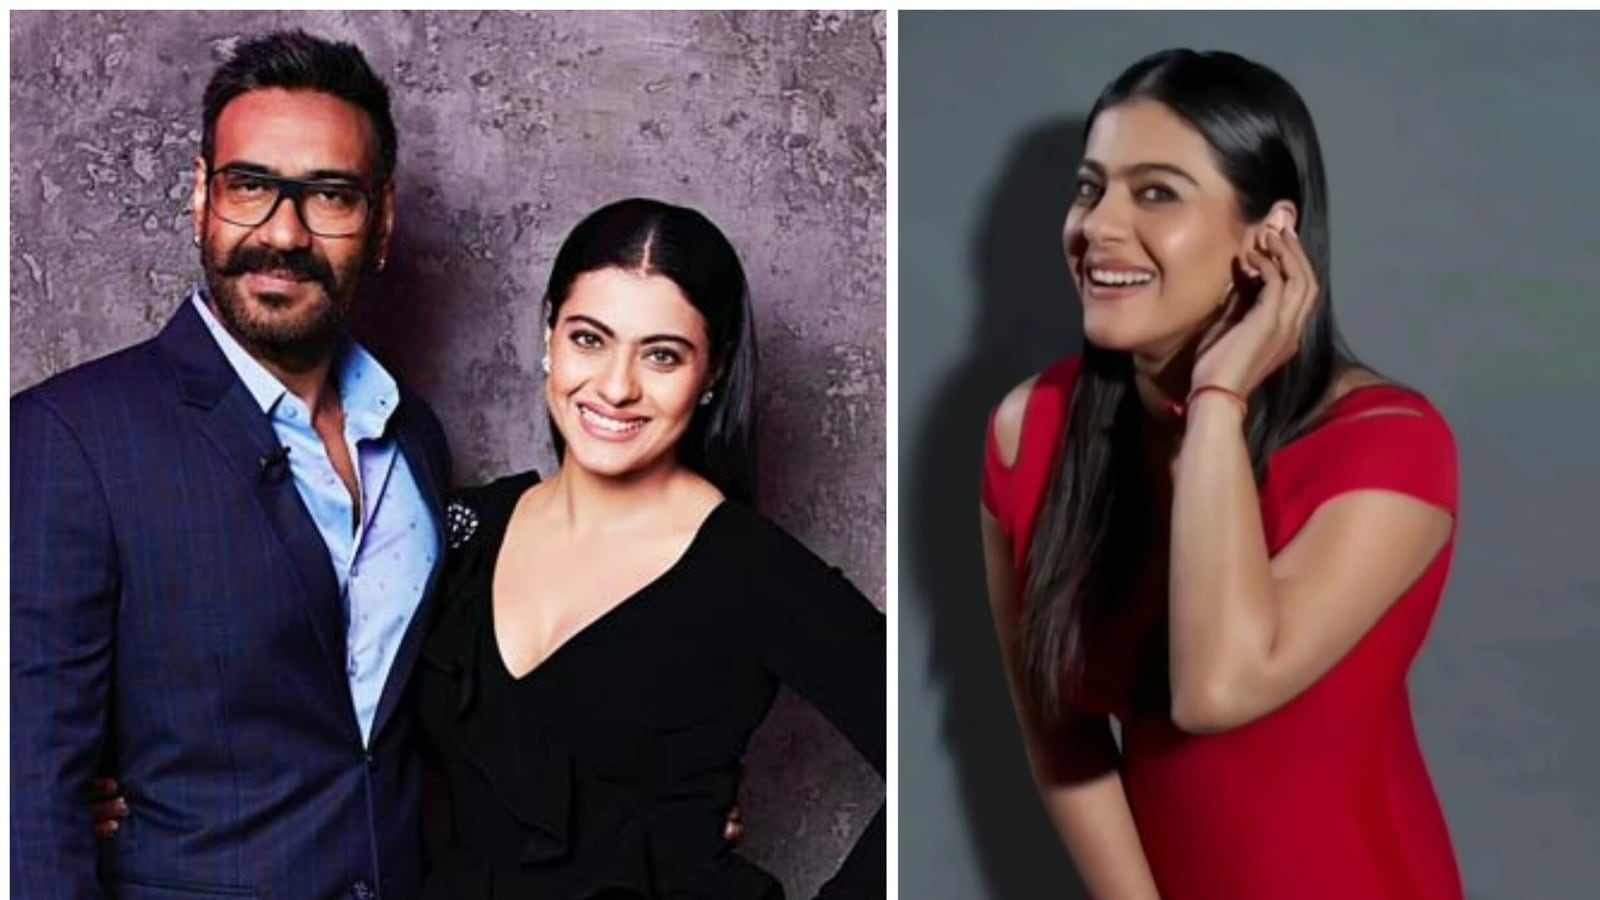 Ajay And Kajol Hind Xxx - Ajay Devgn shares glam pictures of Kajol to wish her on birthday, fans  react | Bollywood - Hindustan Times